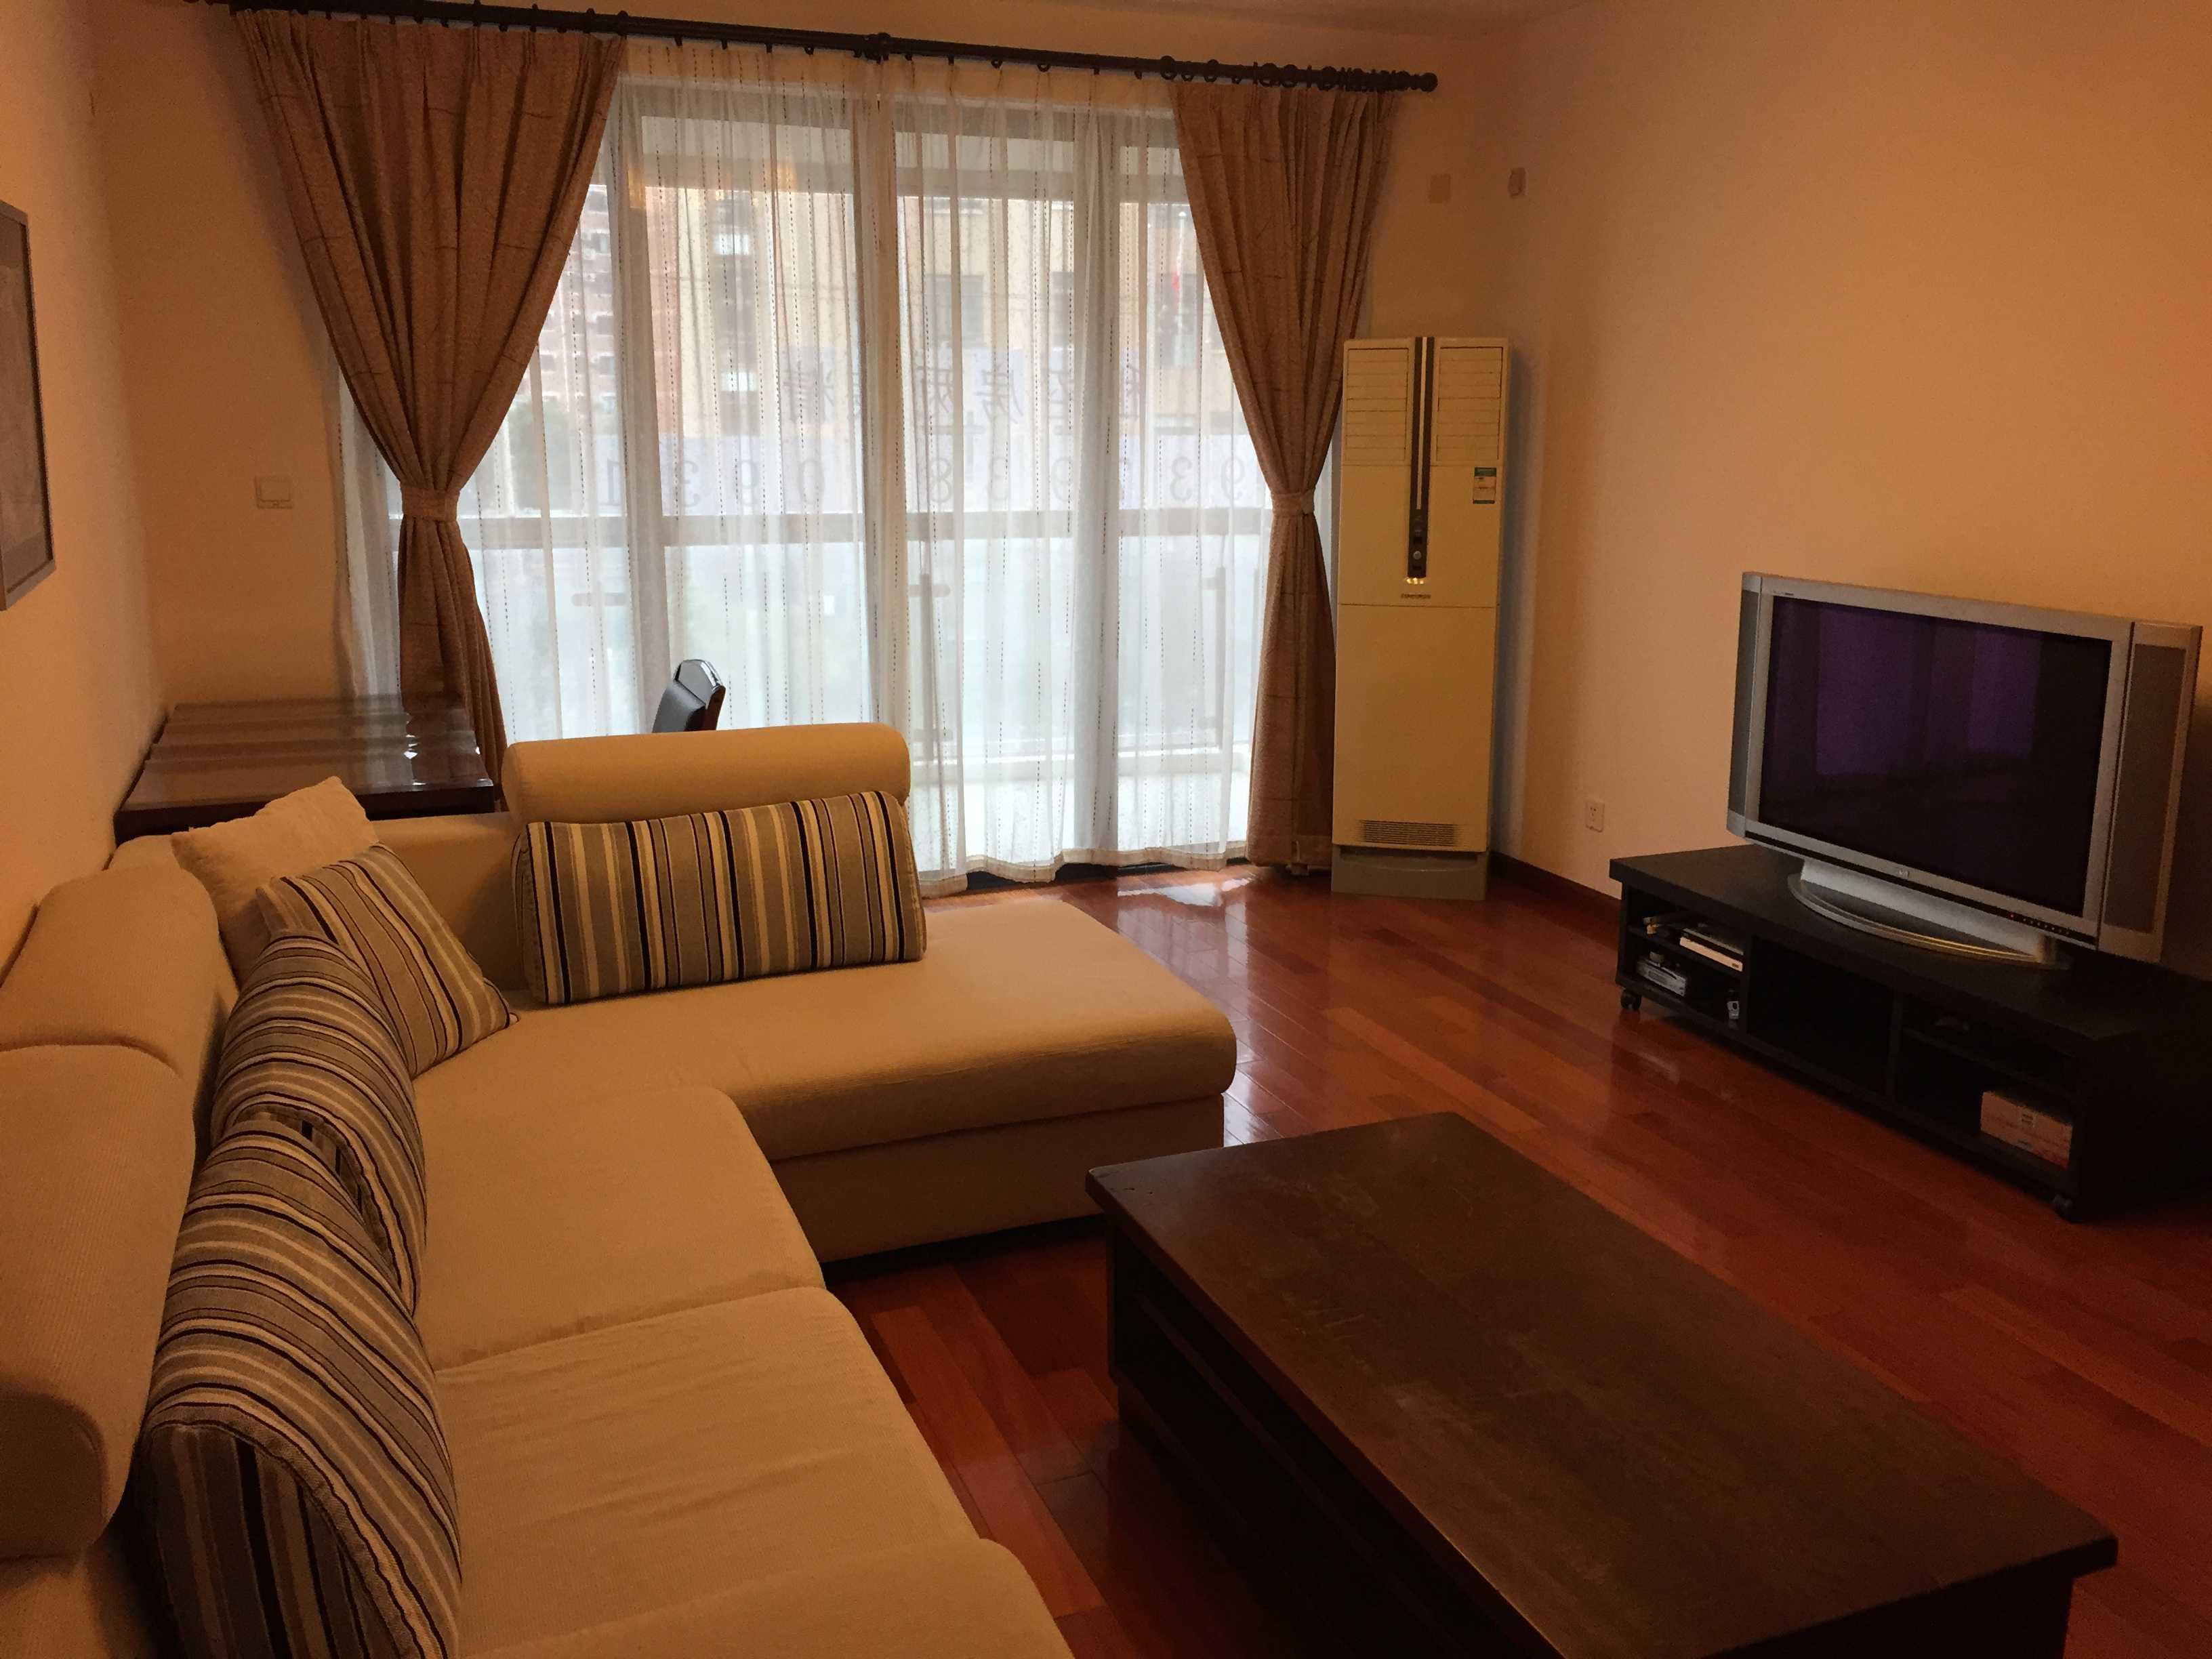 Big Living Room Good Price, Bright Spacious Apartment for Rent near Shanghai Zoo